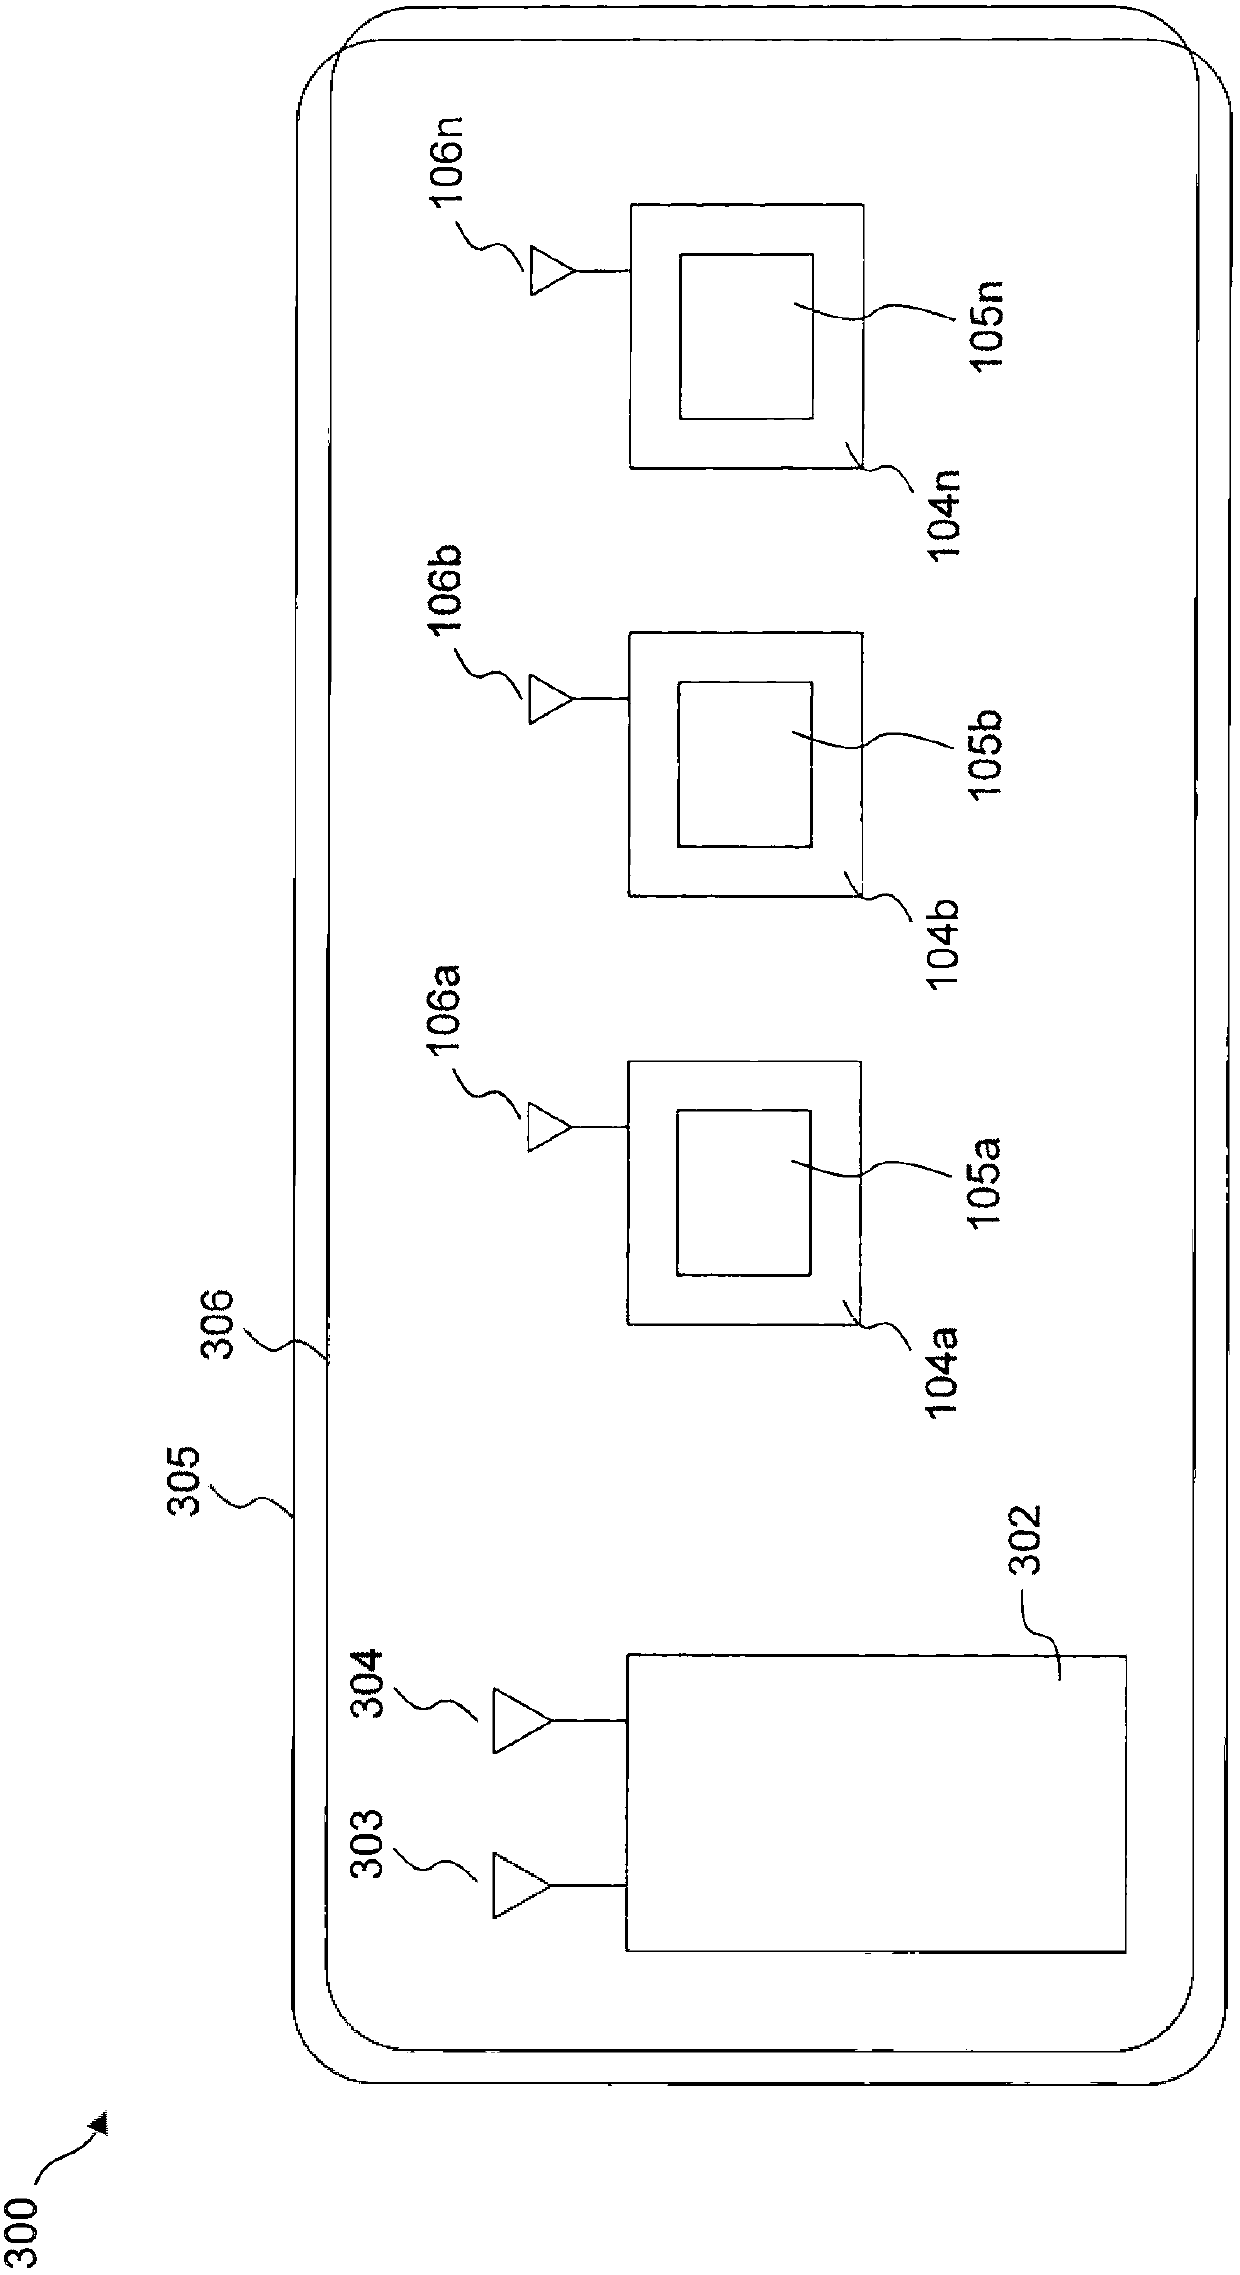 Power savings in a mobile communications device through dynamic control of processed bandwidth